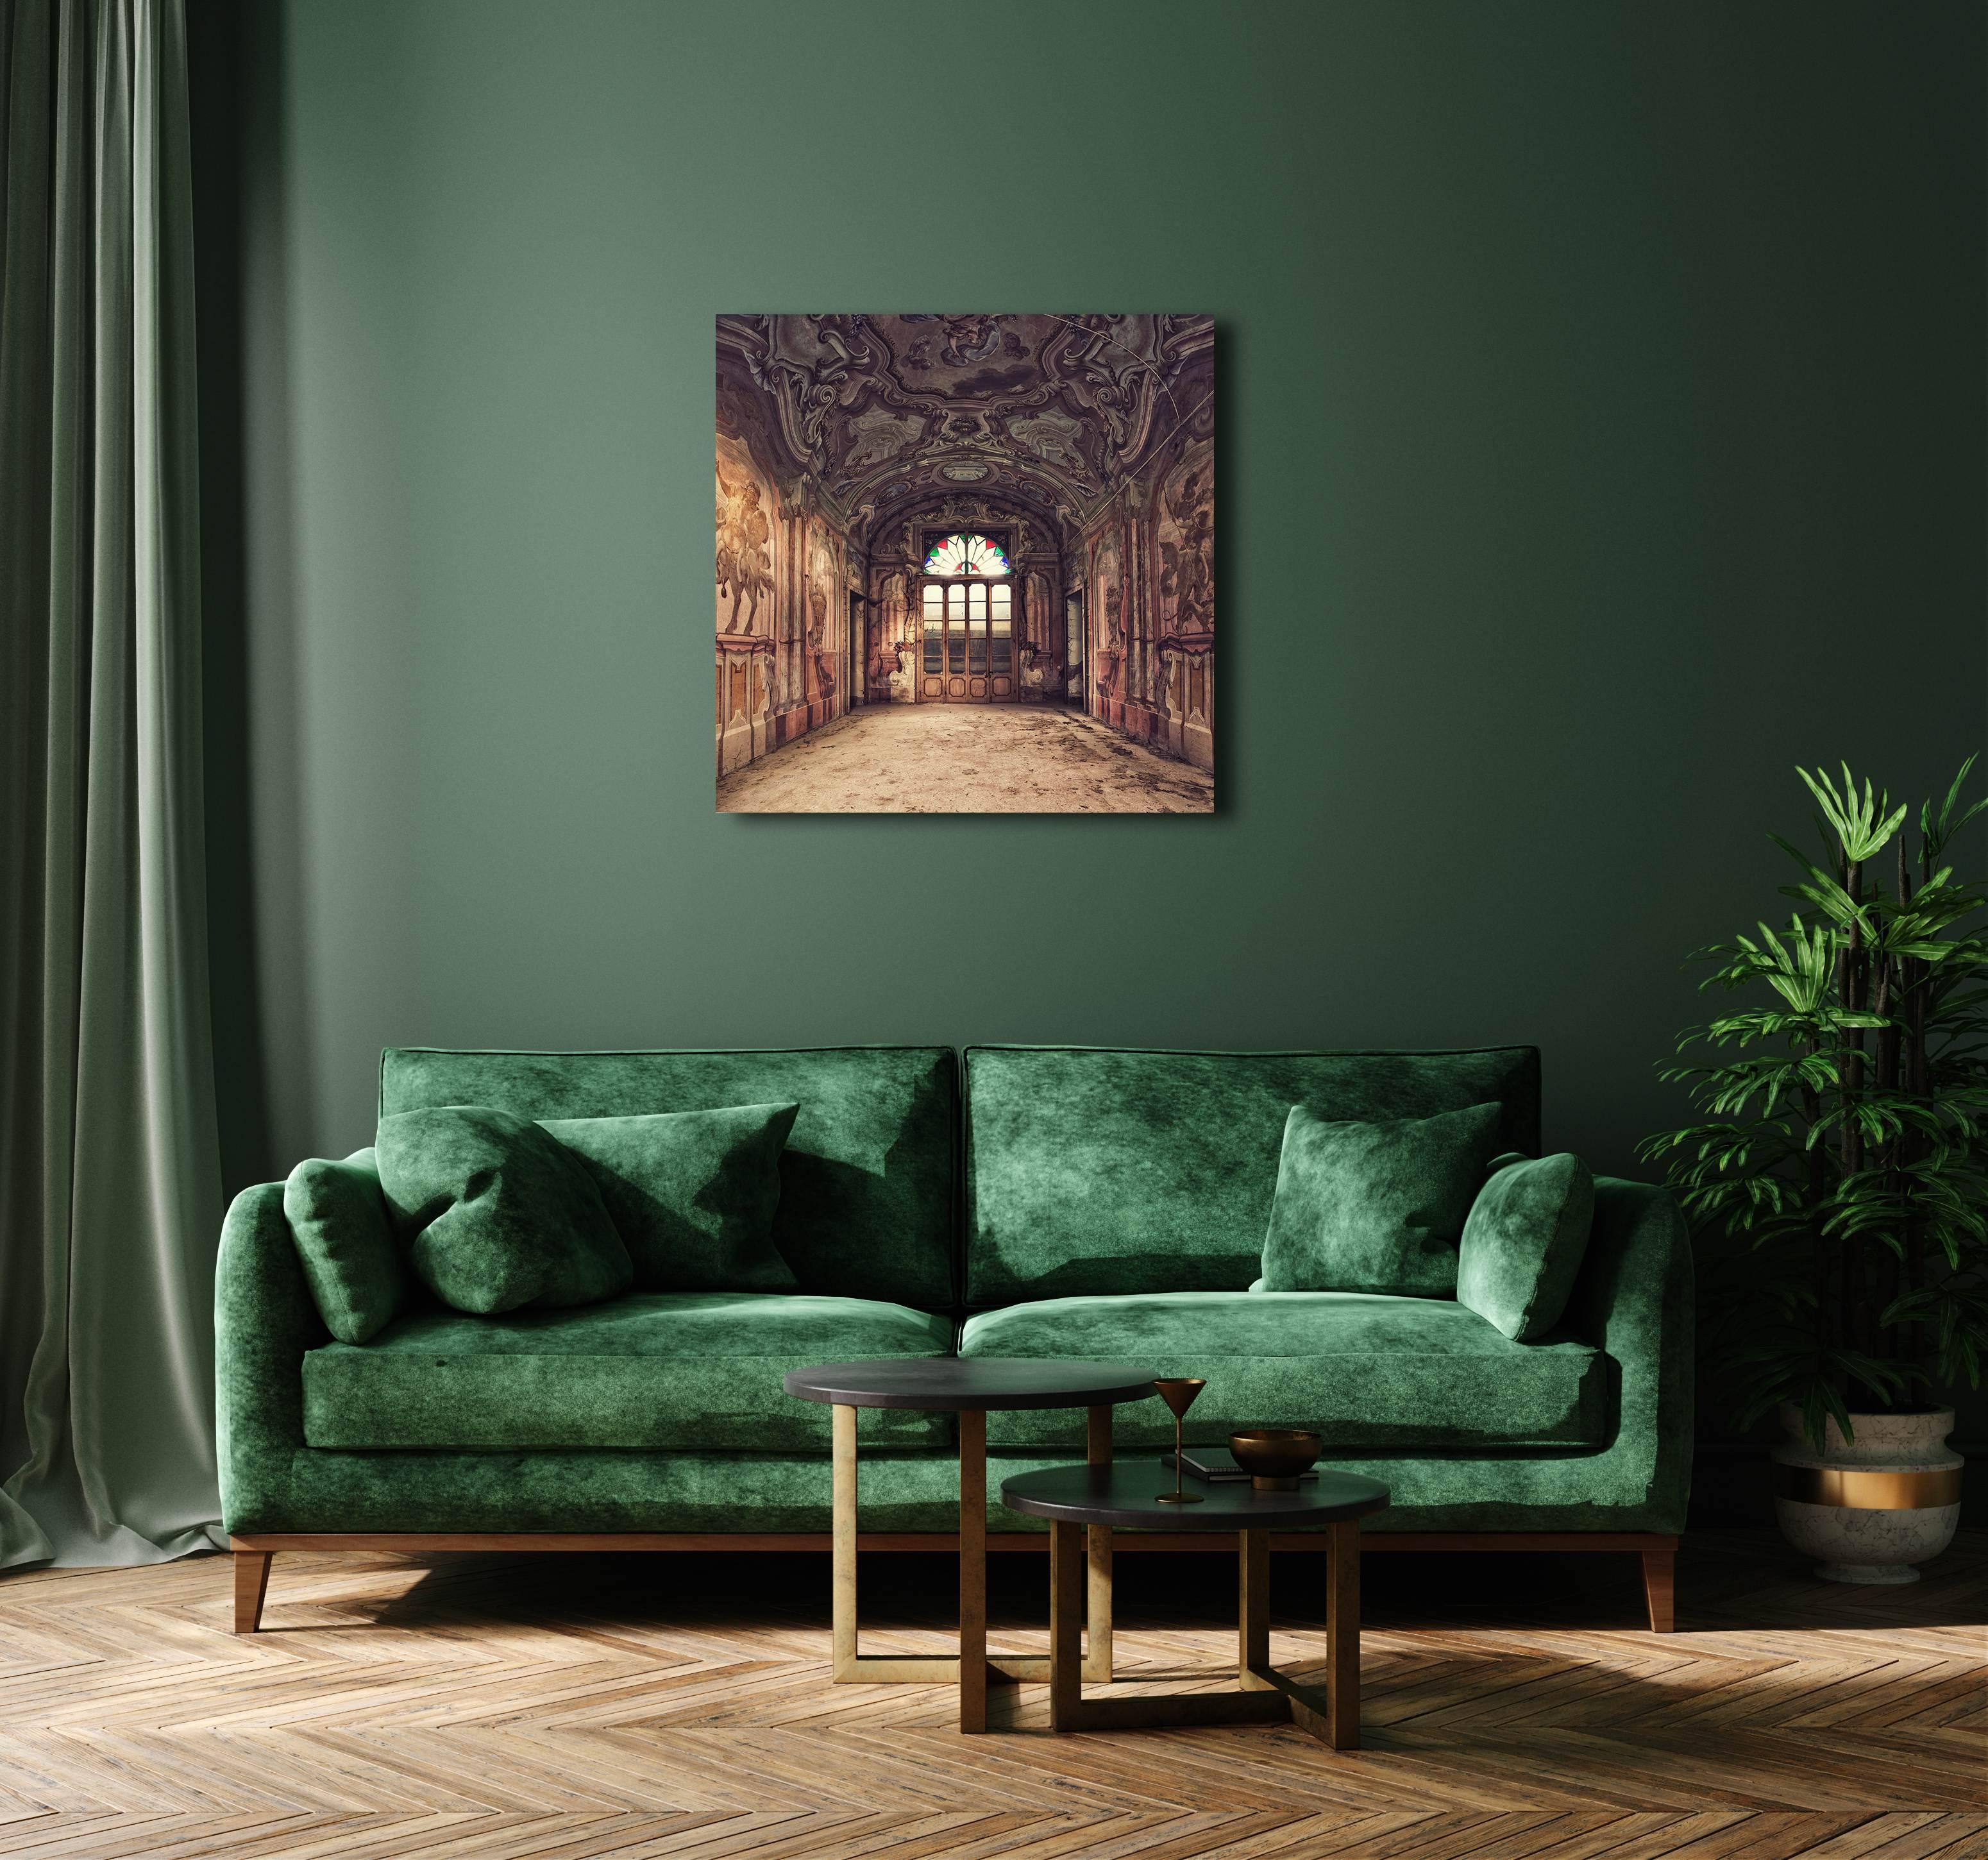 Palazzo is a limited-edition photograph by British contemporary artist Gina Soden from the “Decadenza” series.

This photograph is sold unframed as a print only. 
All prints are signed and numbered.
Contact us regarding framing options.

This image